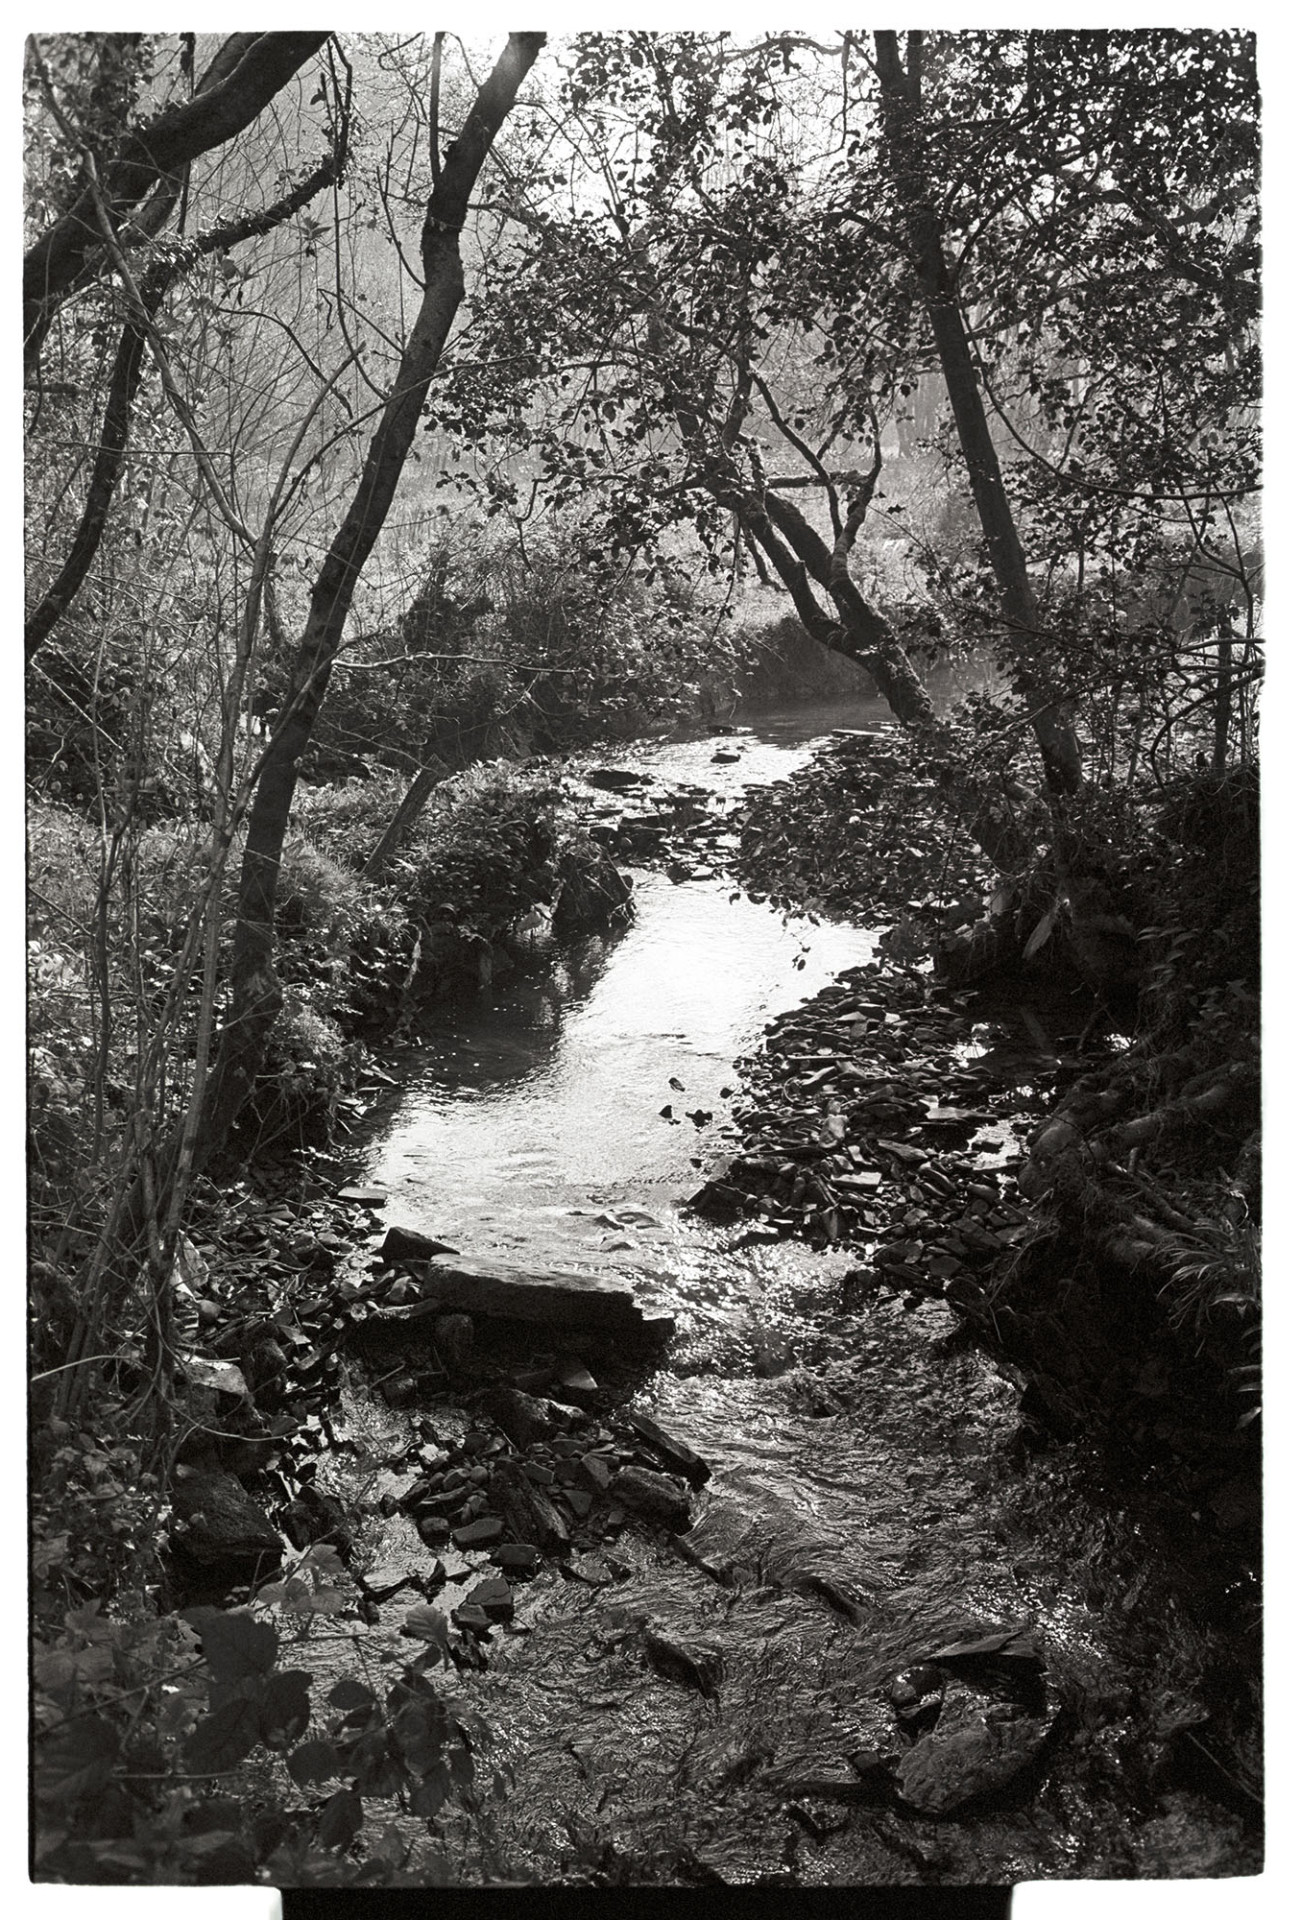 Stream with overhanging trees. 
[A narrow stream flowing over rocks and stones, between overhanging trees at Rushleigh Brook, Budds Mill, Dolton.]